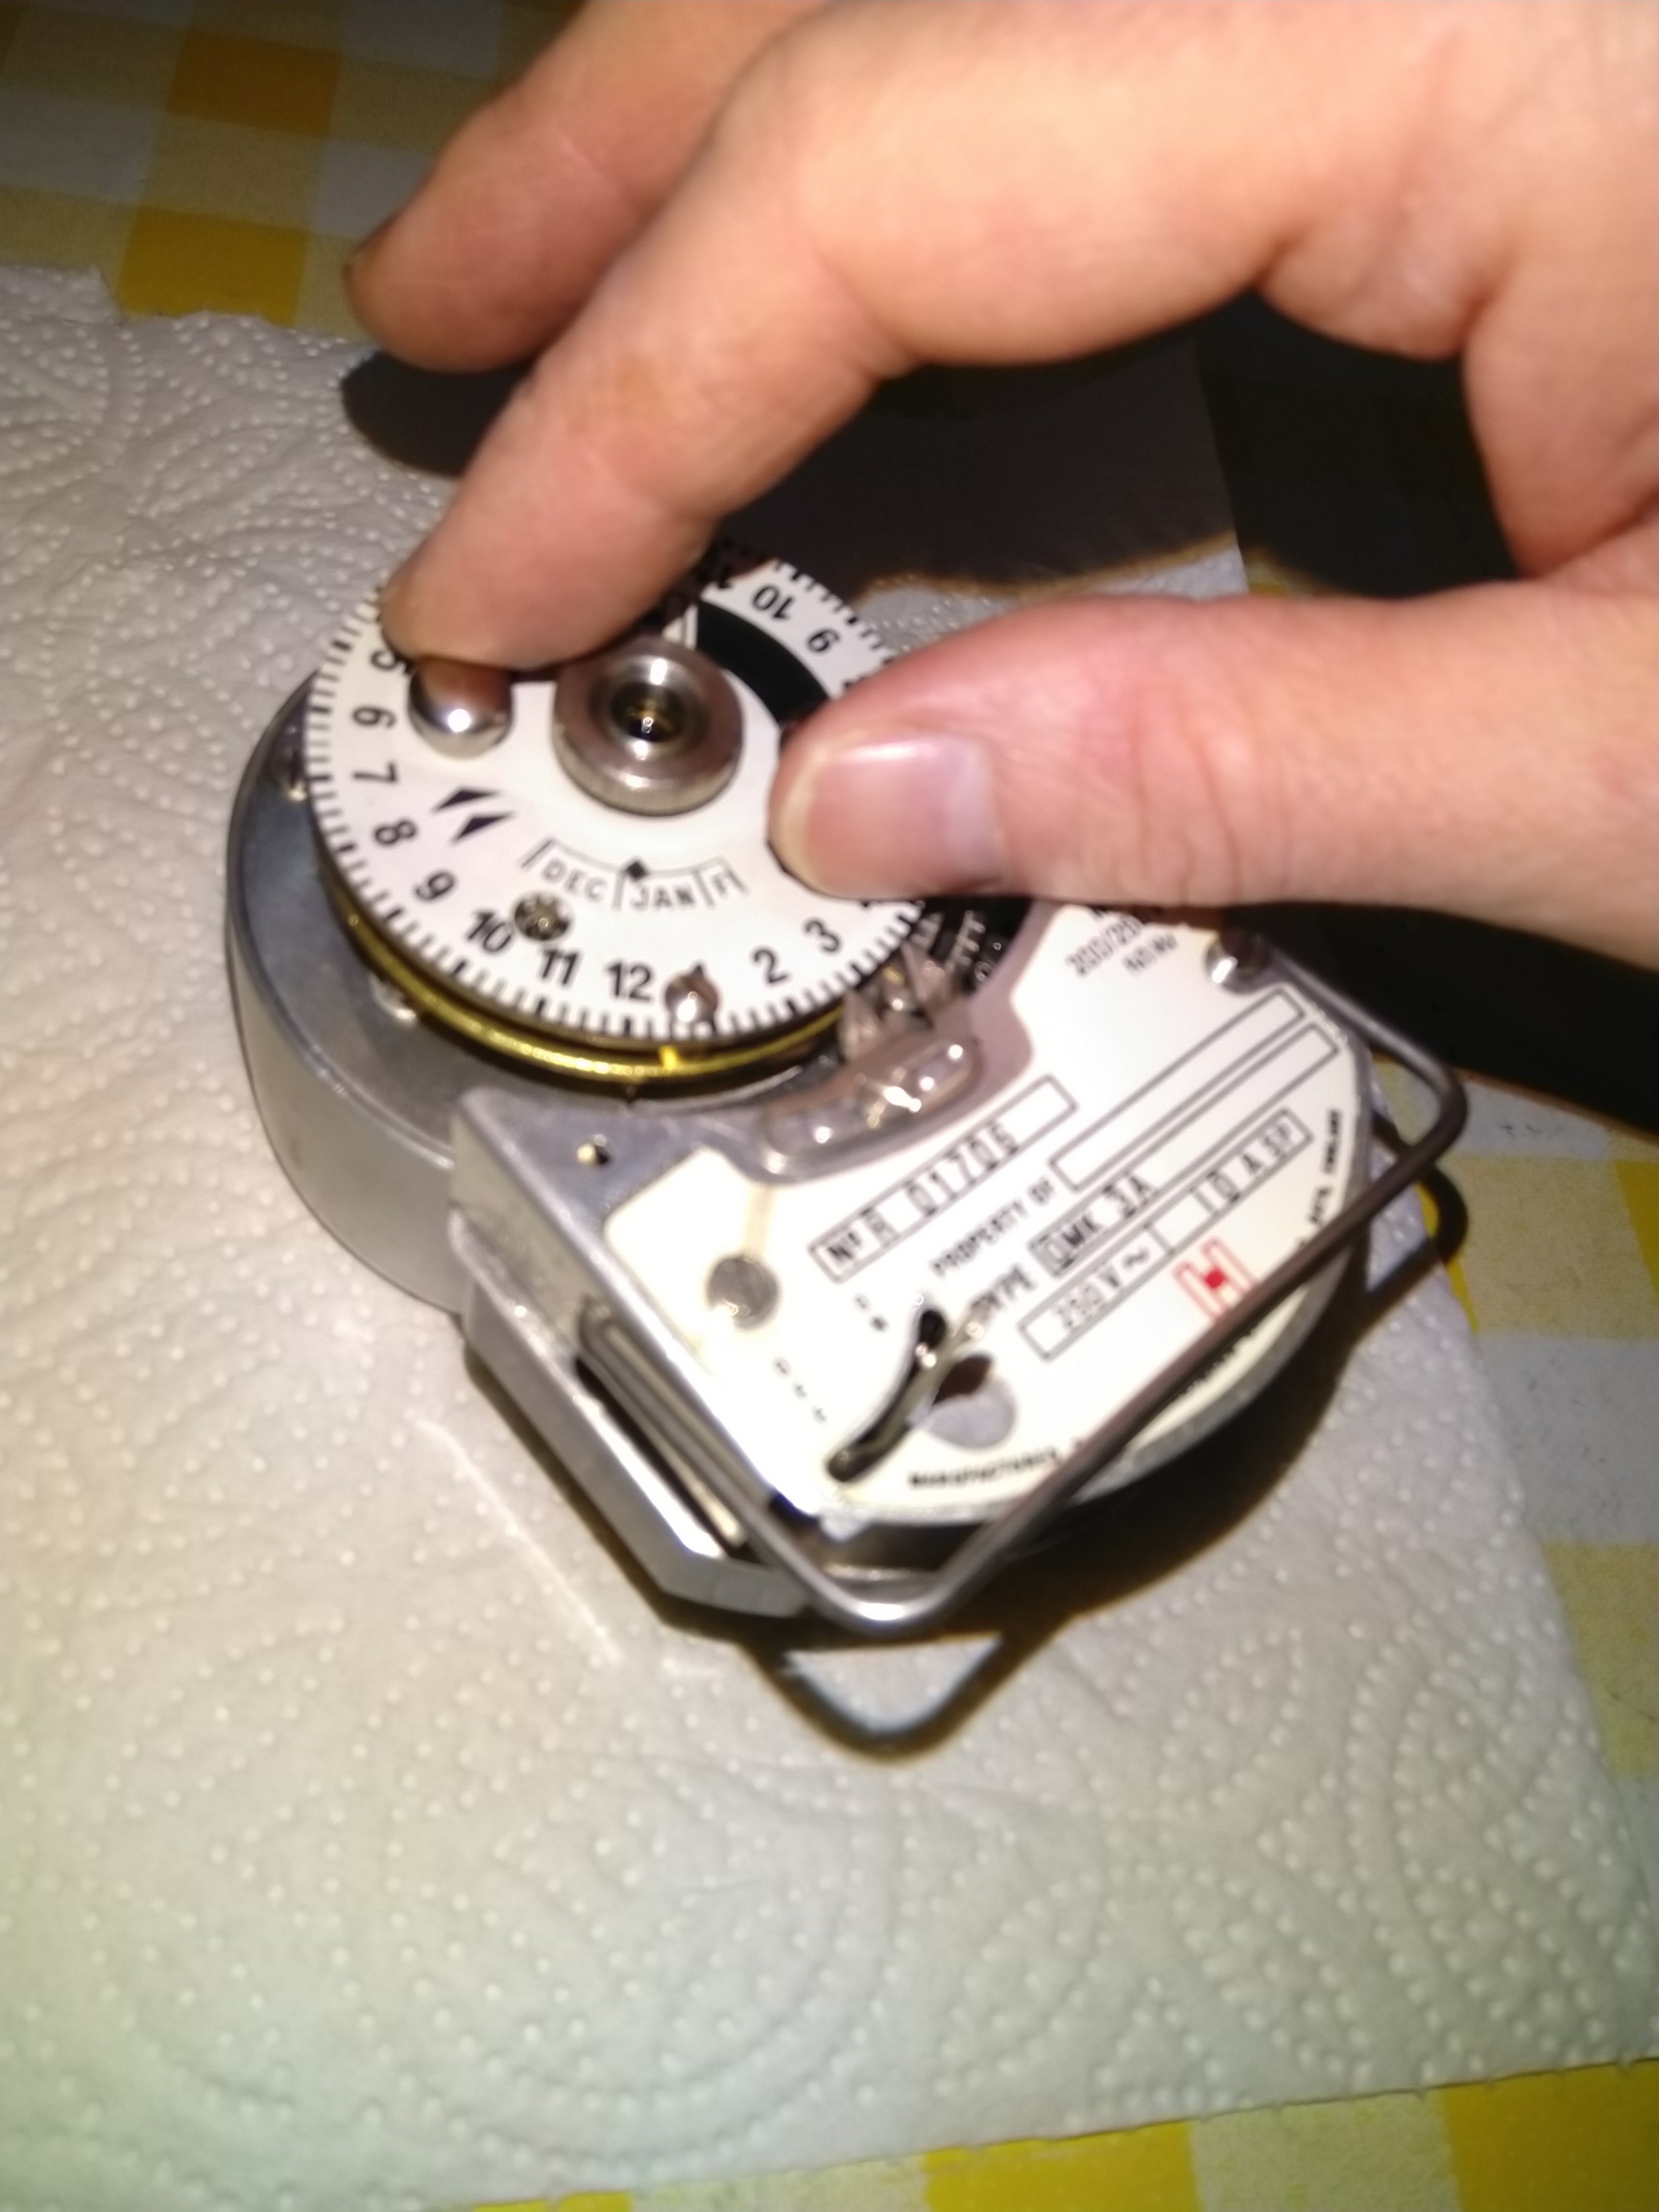 Adjusting the time on a timeswitch